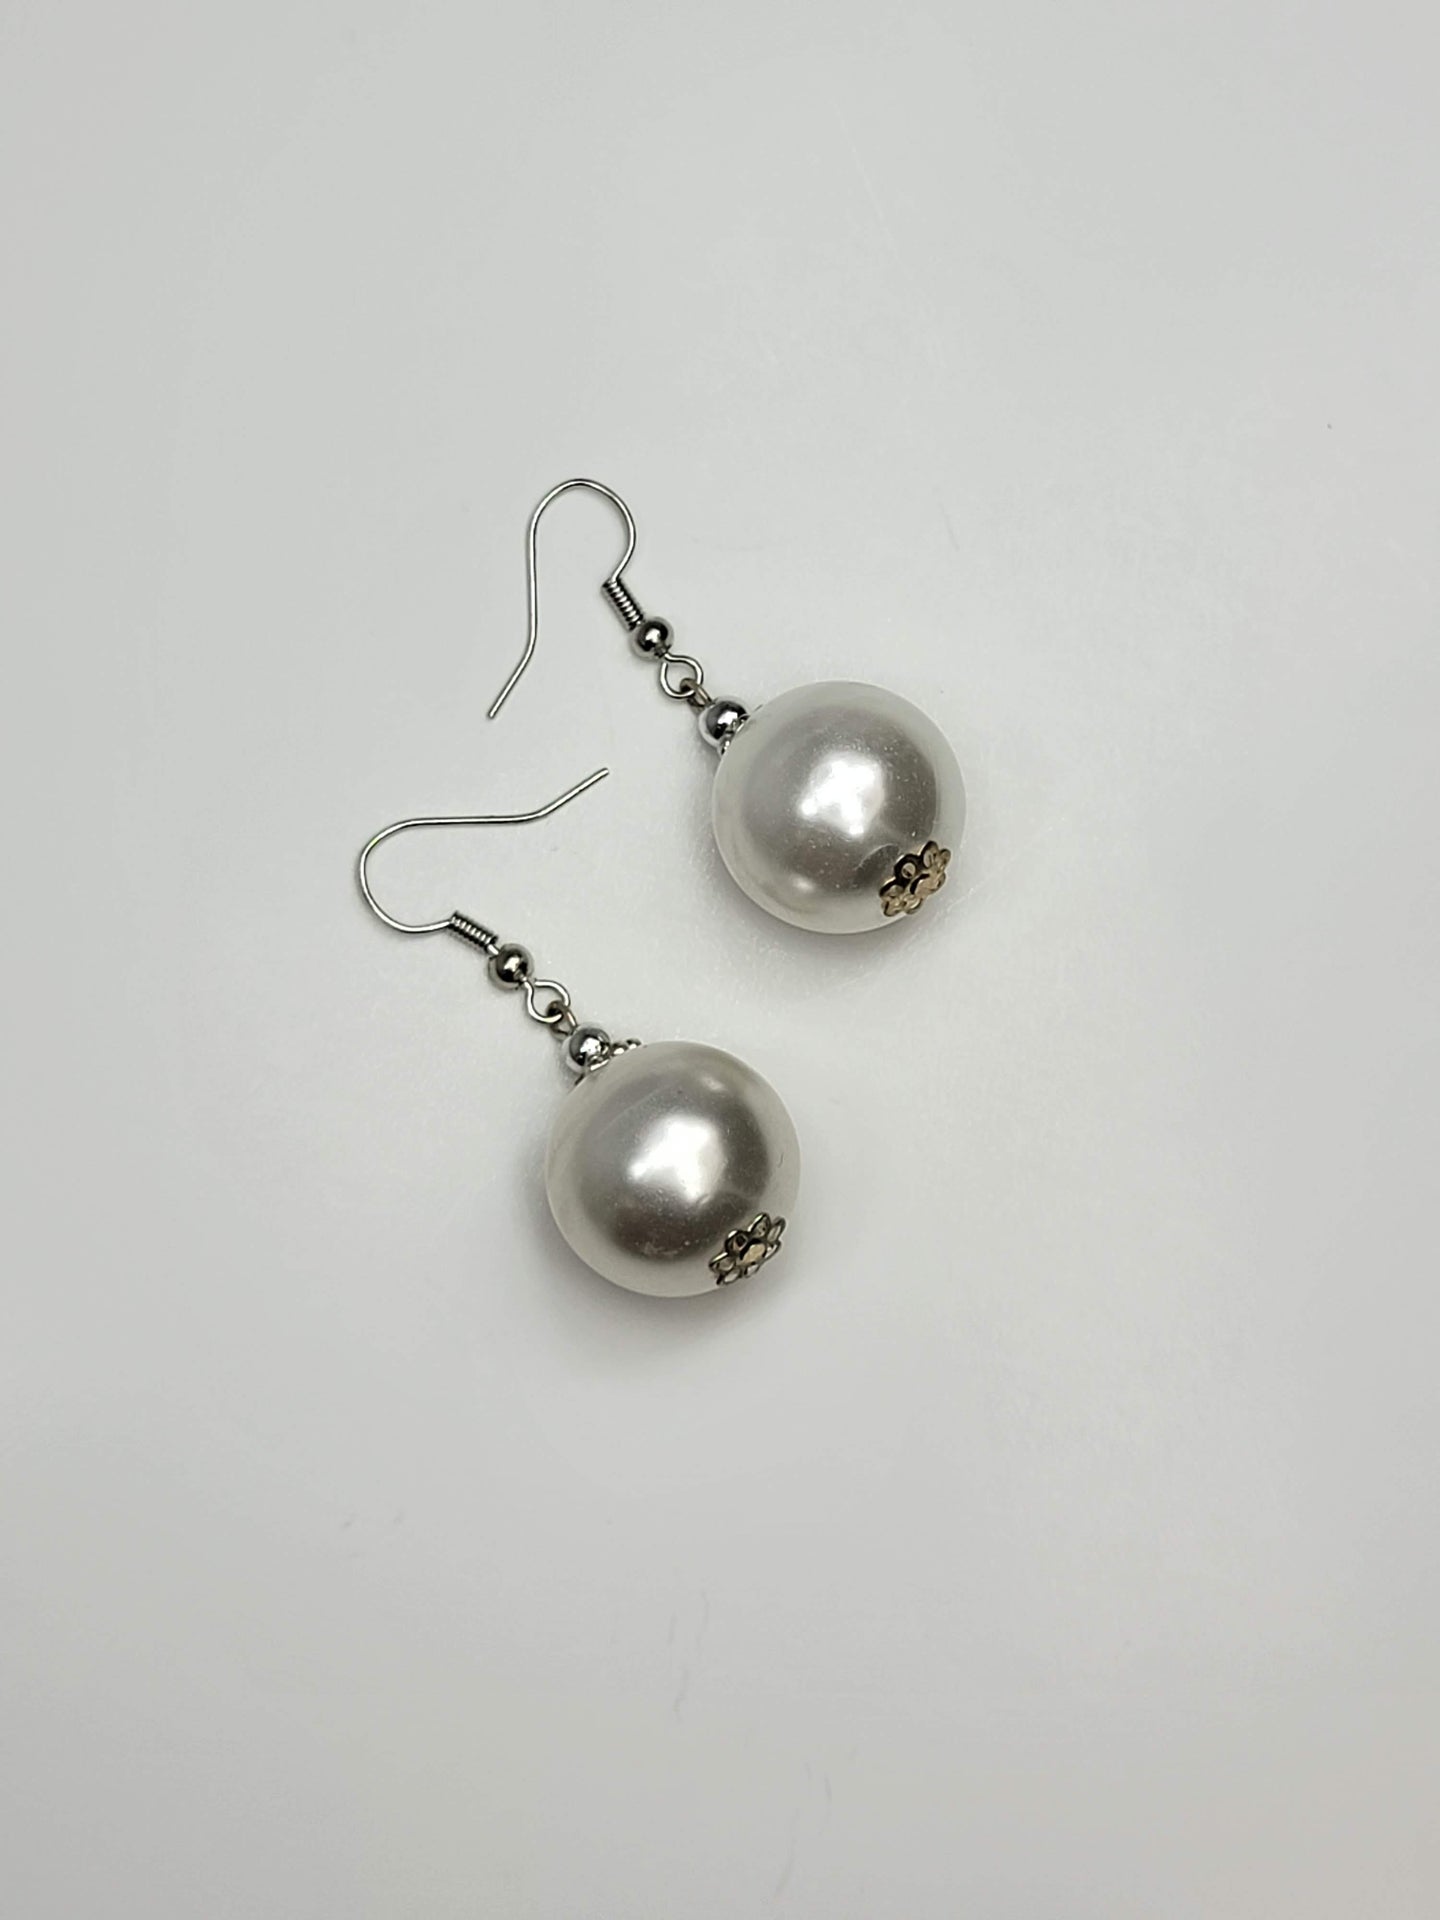 White, Pearl & Silver Earrings - One of a kind